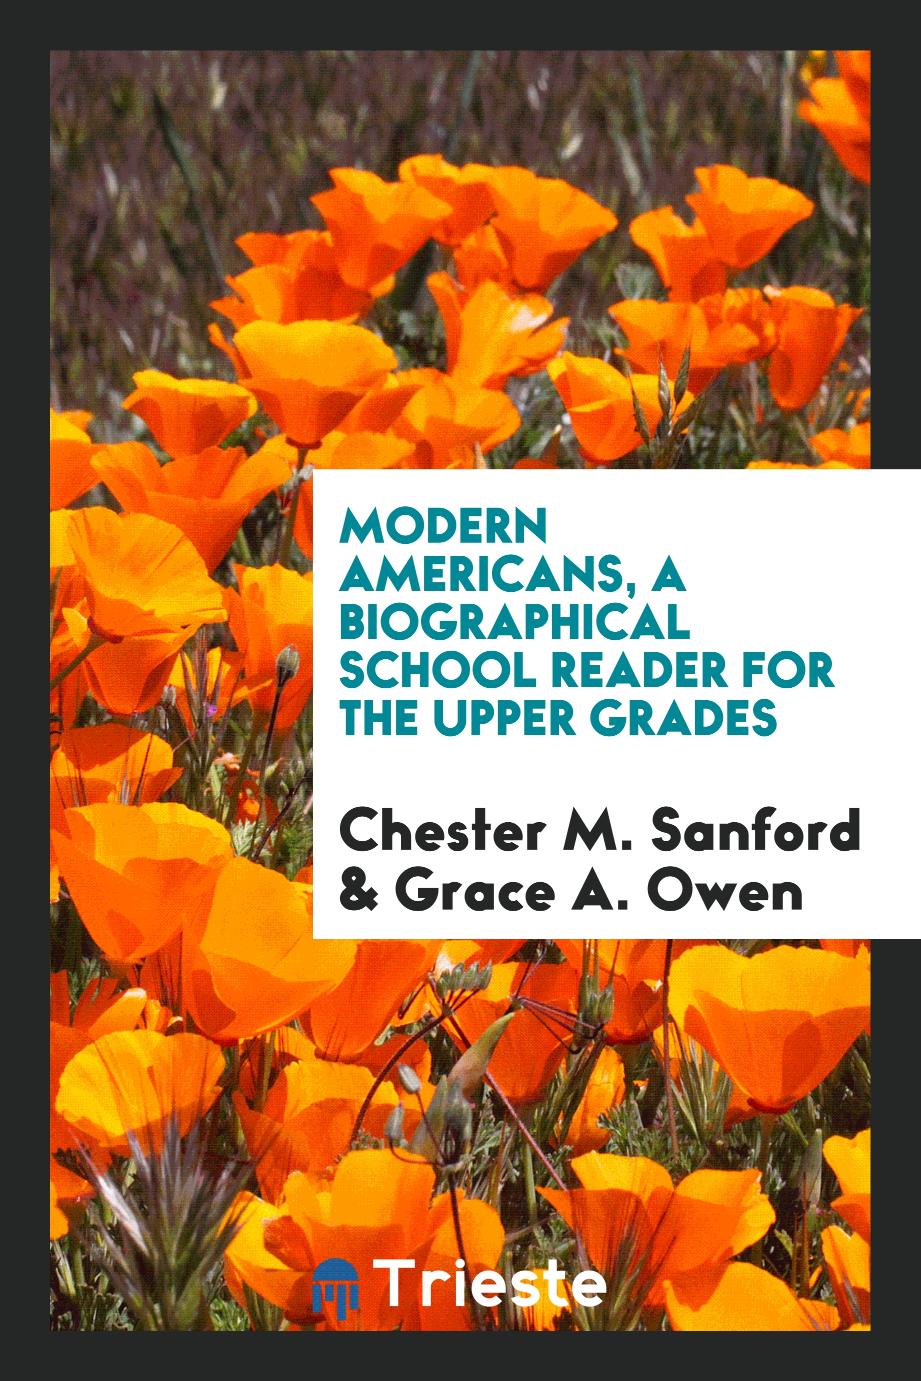 Modern Americans, a biographical school reader for the upper grades